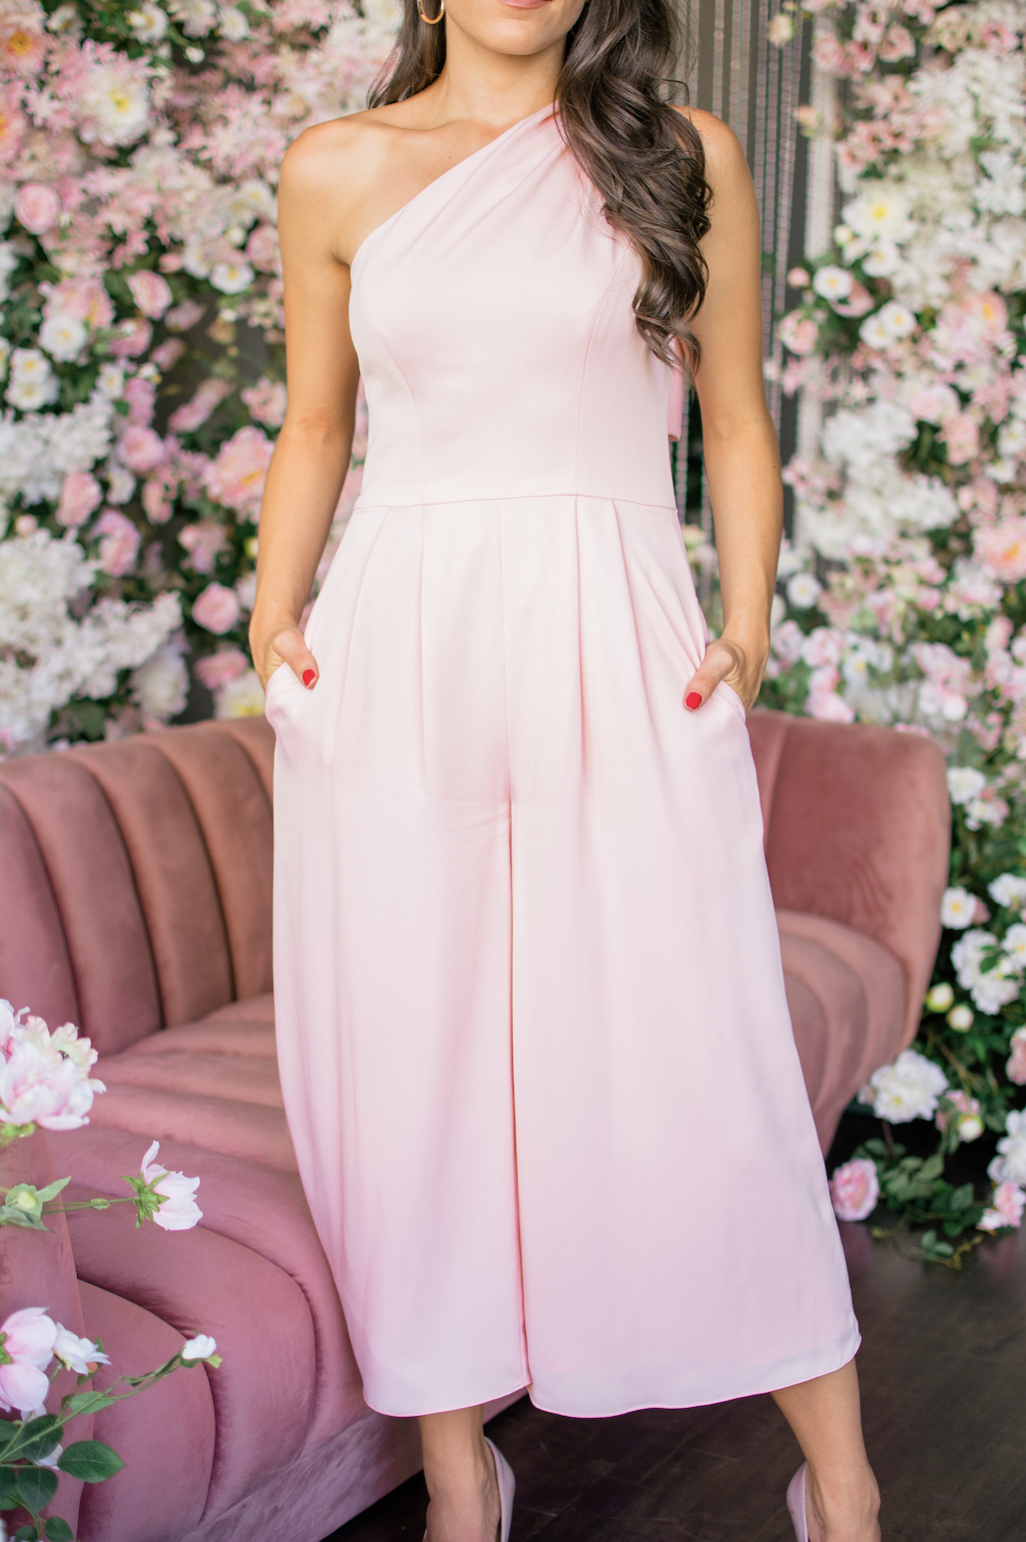 3 Amazing Party Dresses That Flatter All Body Types | The Pink Brunette